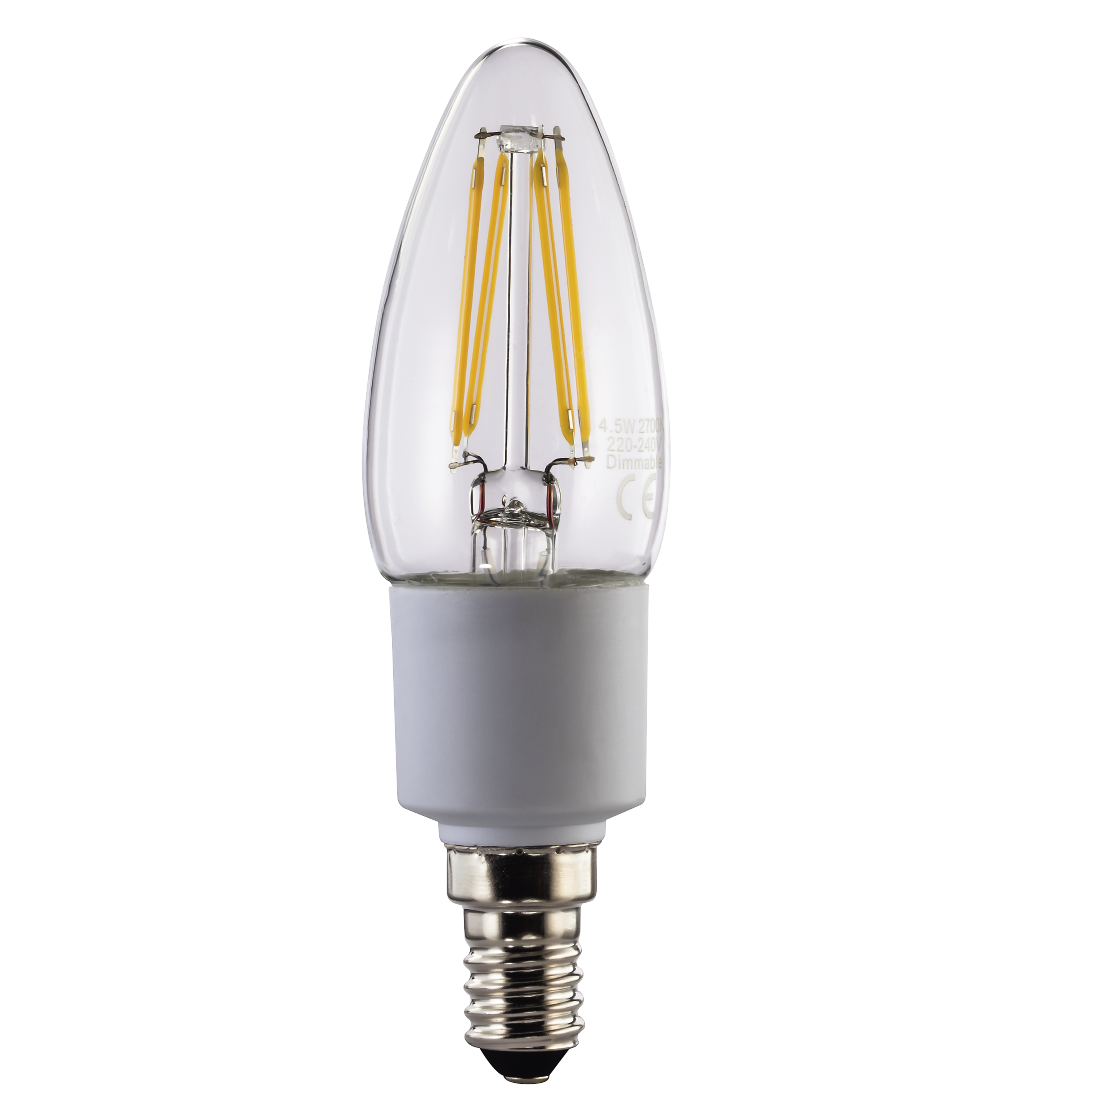 abx High-Res Image - Xavax, LED Filament, E14, 470lm replaces 40W,candle bulb, warm white,dimmable